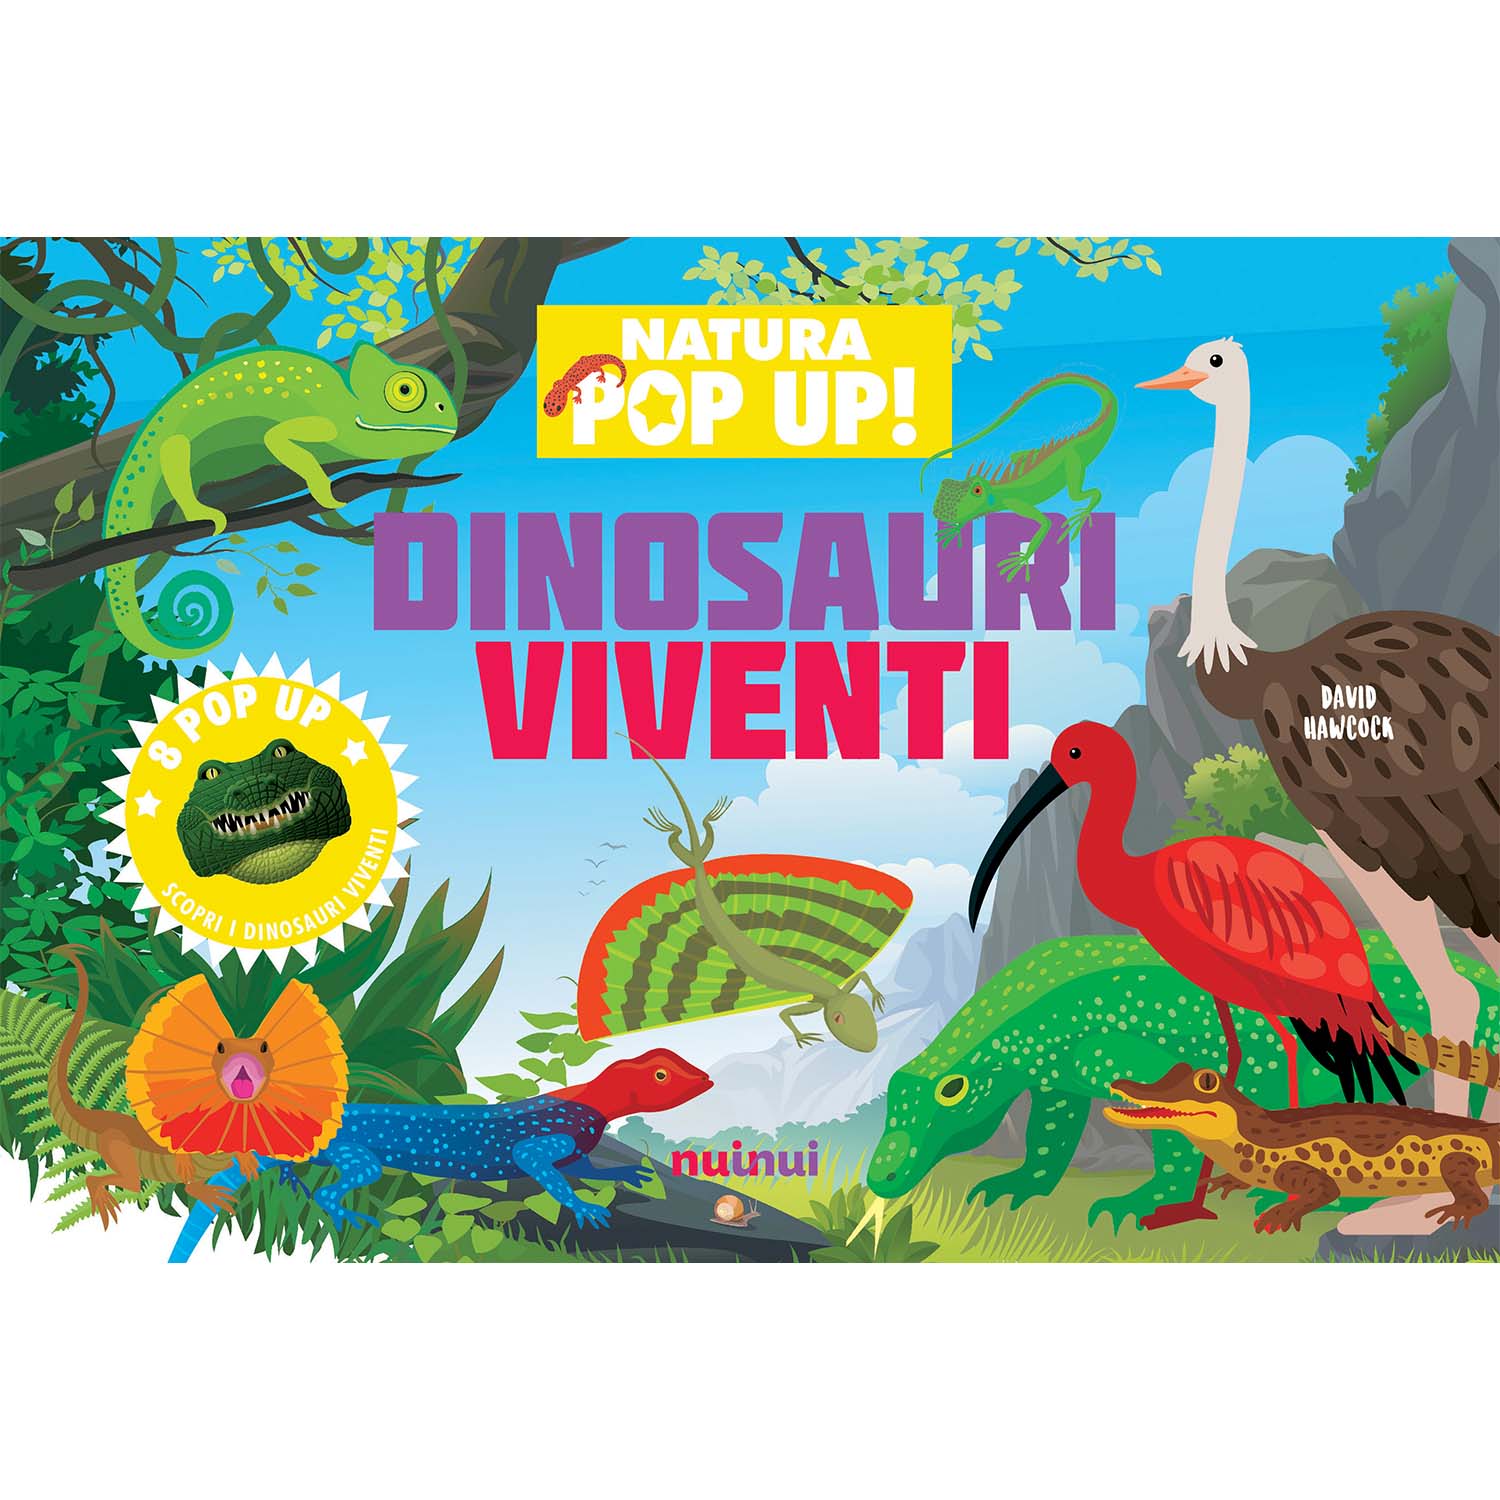 Nature in pop up - Living dinosaurs